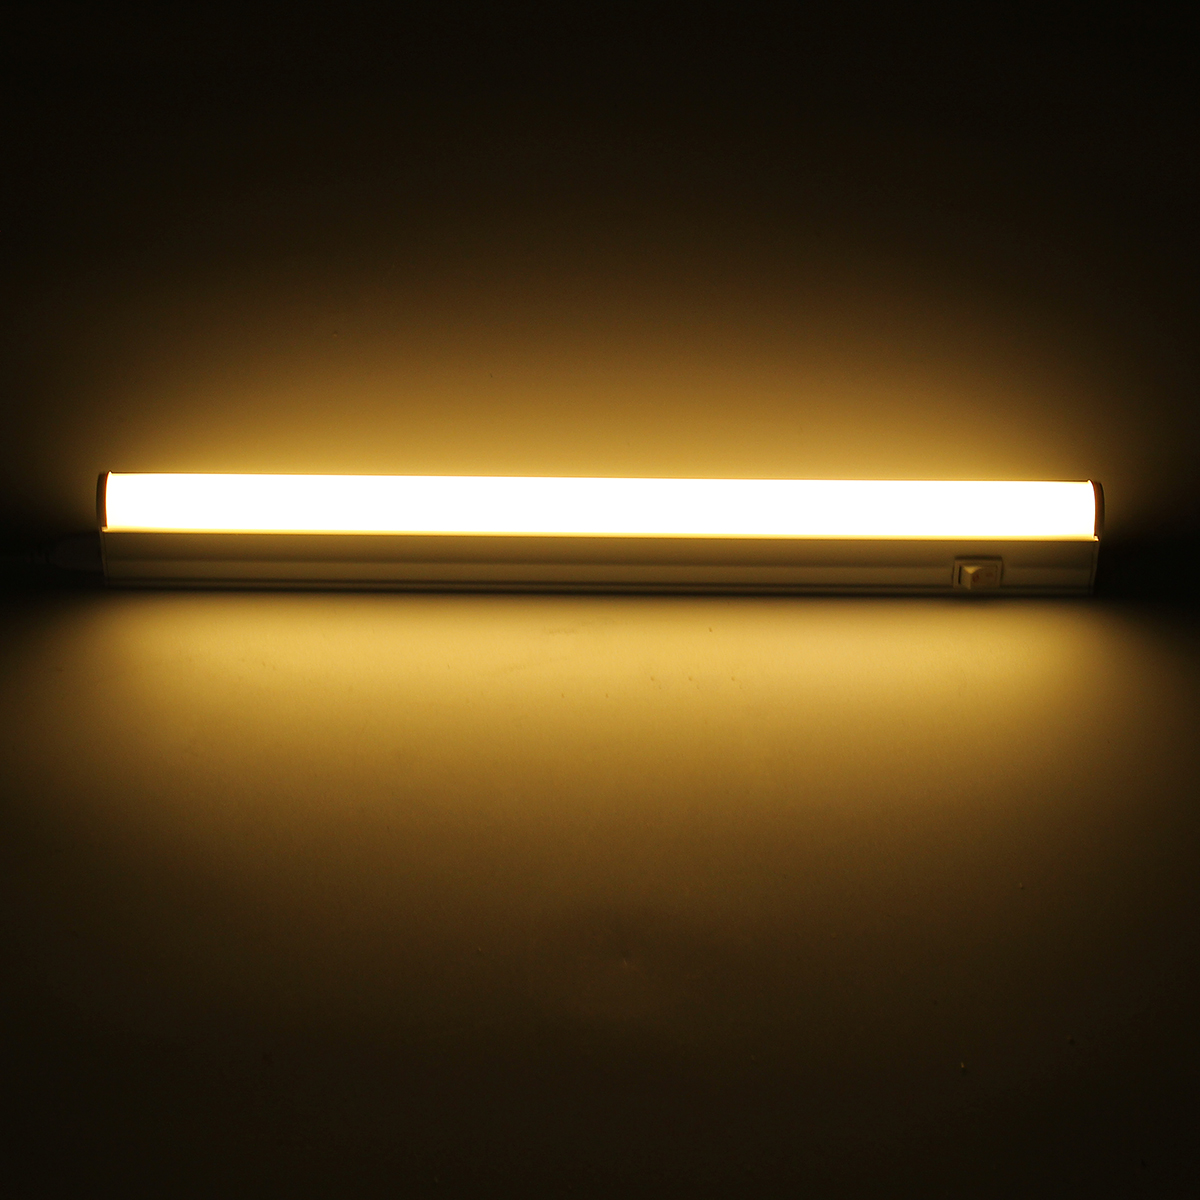 30cm-5W-440LM-SMD2835-T5-LED-Fluorescent-Tube-Light-with-Switch-WarmPure-White-AC85-265V-1126346